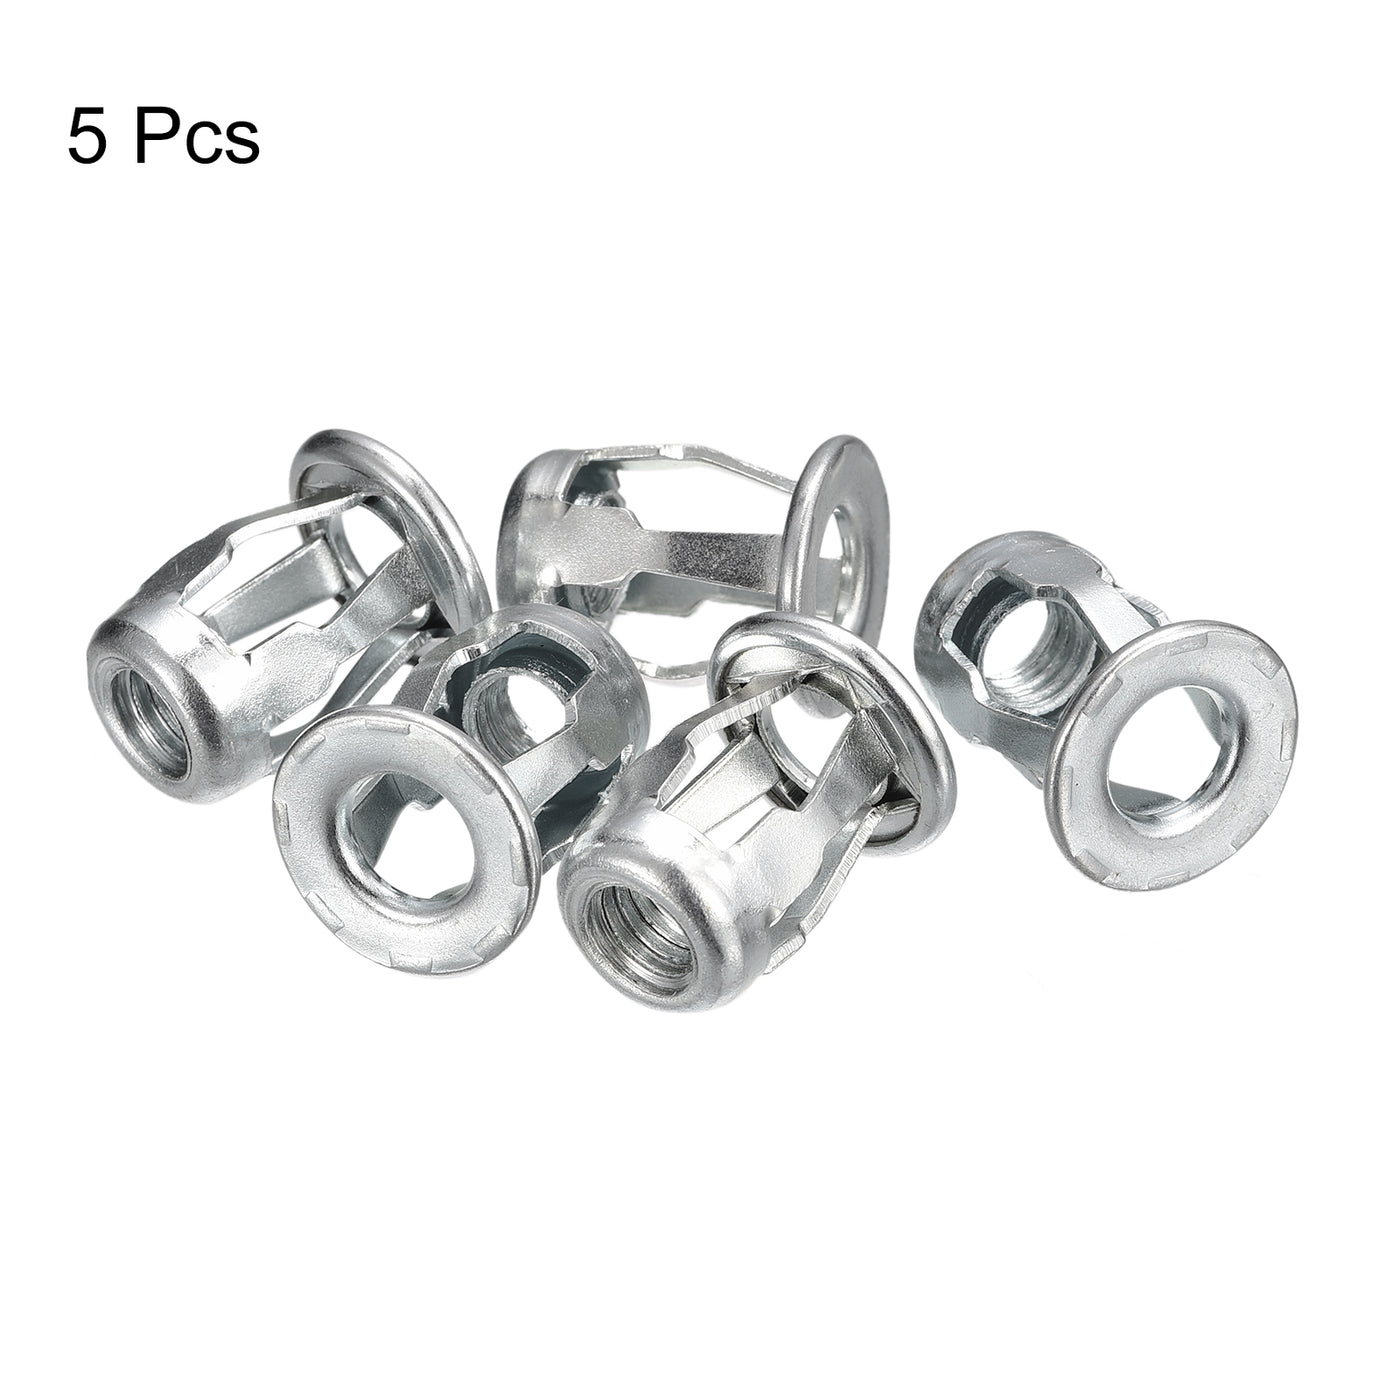 uxcell Uxcell Jack Nuts Threaded Insert Nut Carbon Steel Rivet Nuts for Thin Metal